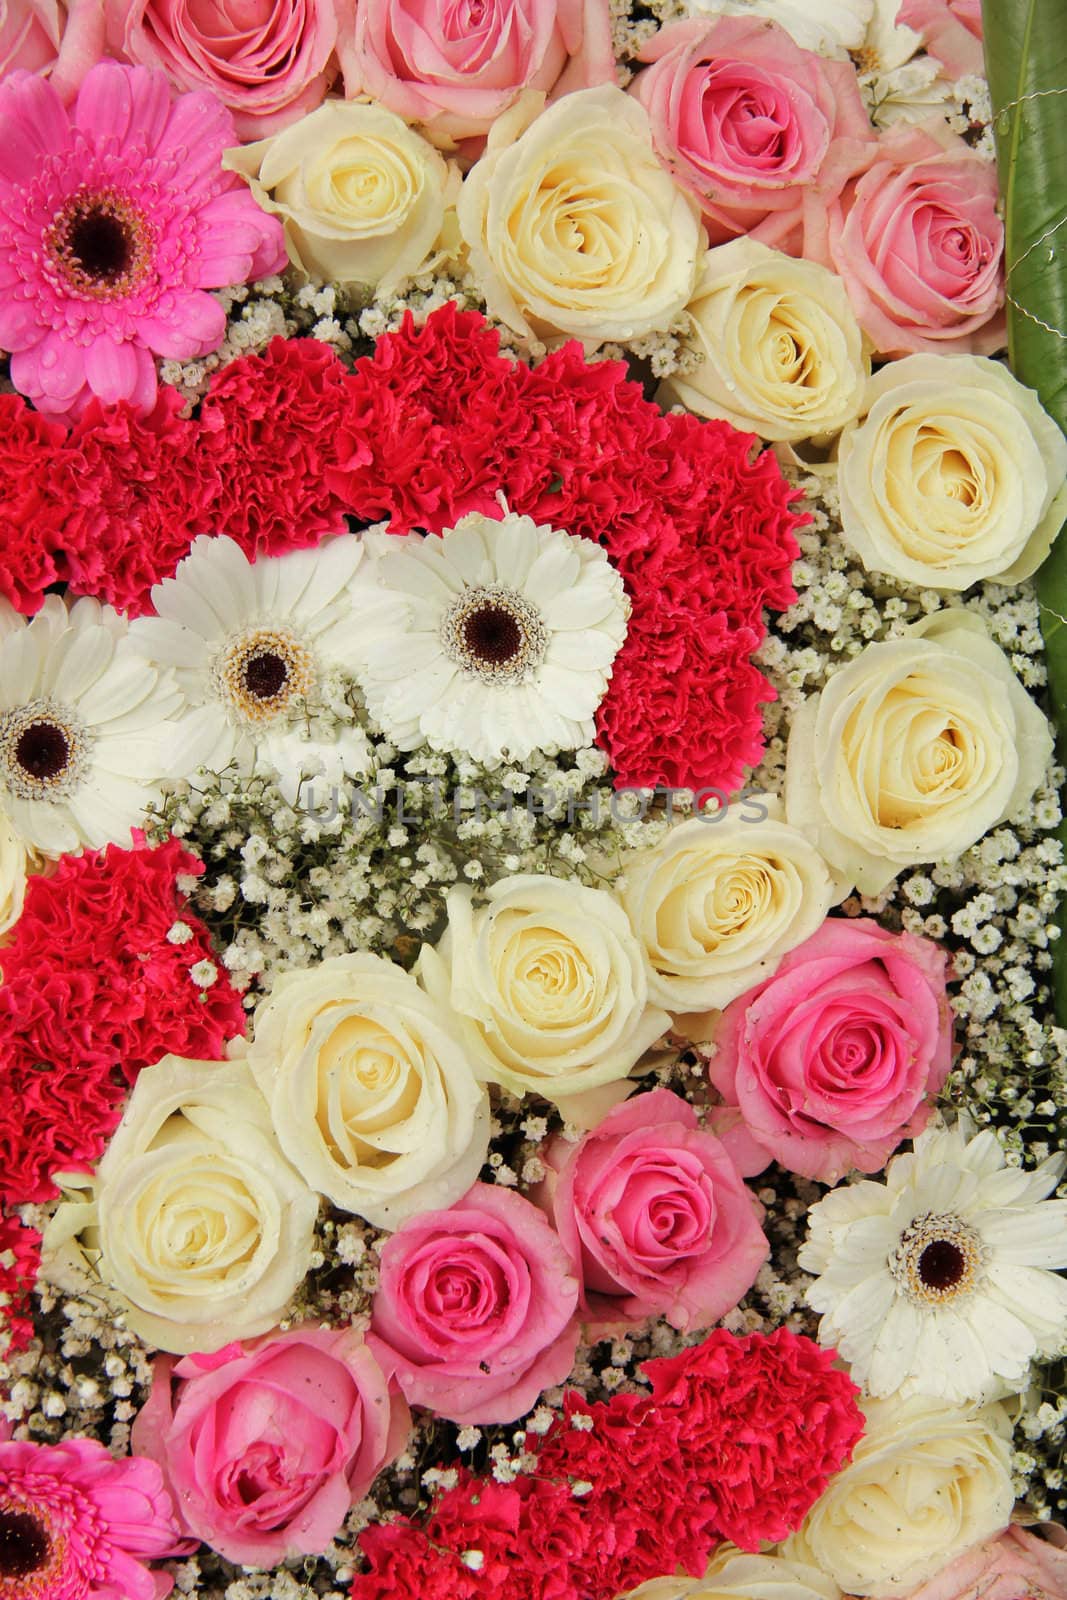 pink and white roses, together with carnations and gerberas in a wedding centerpiece